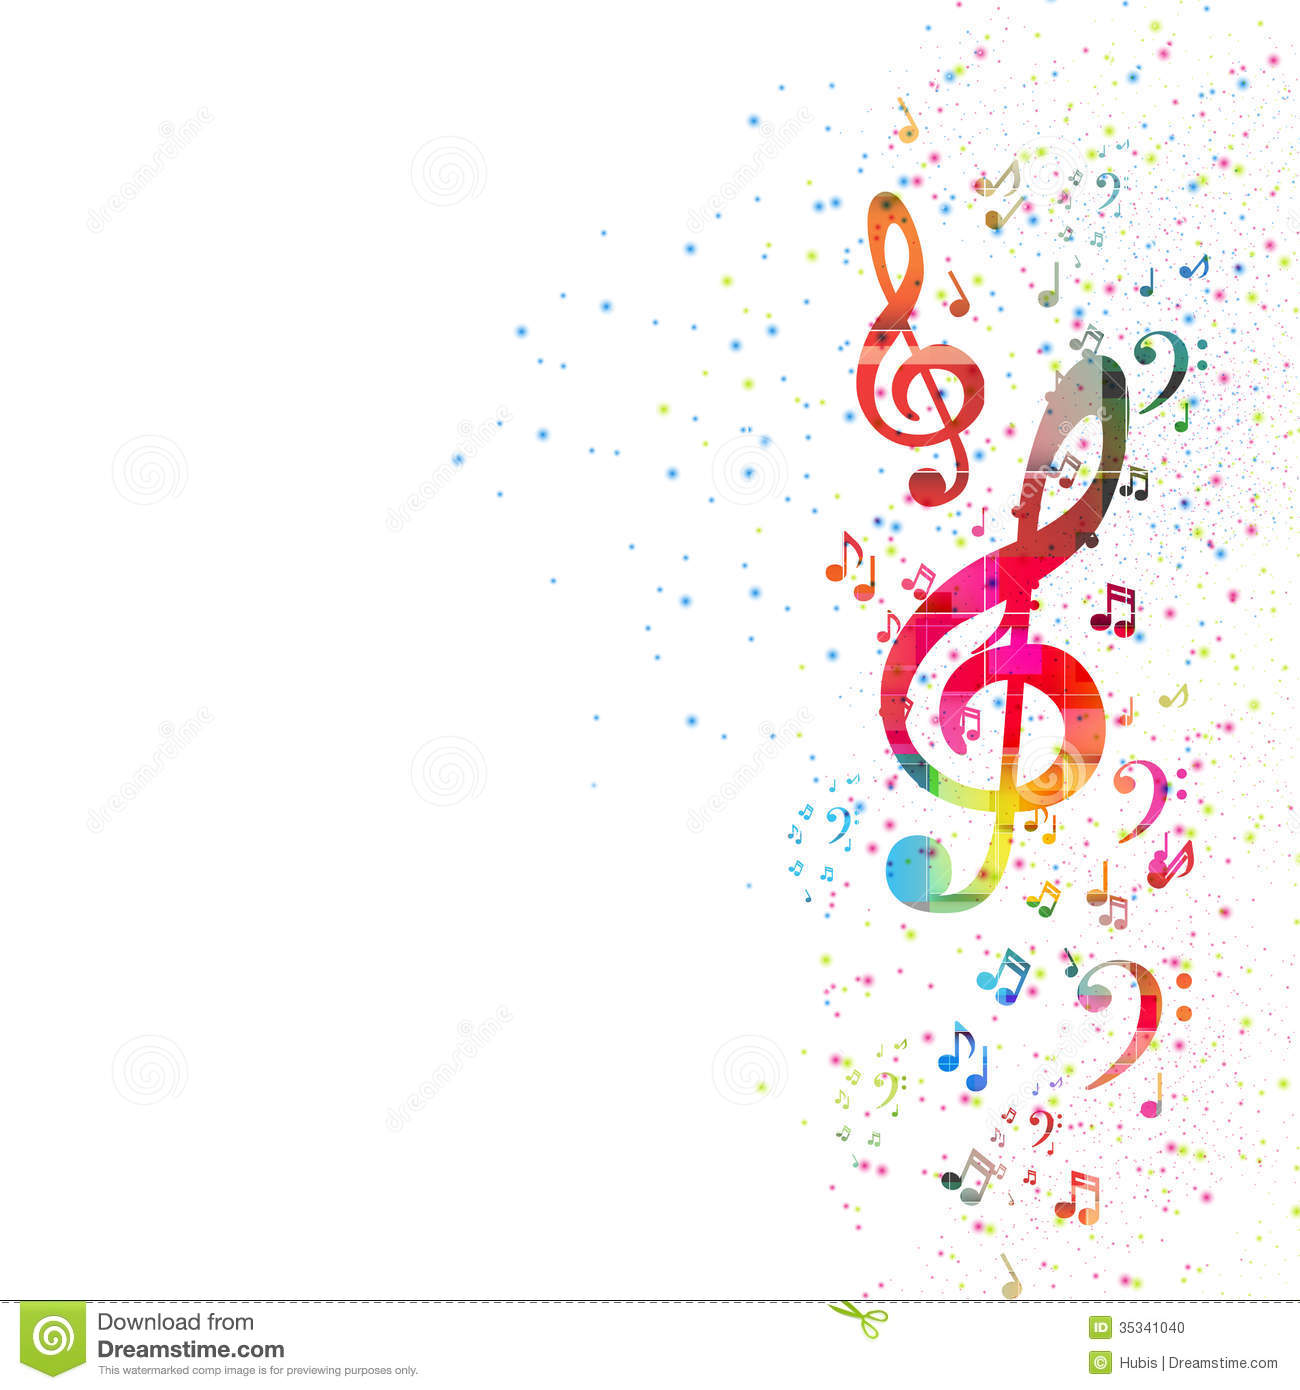 975951 musical notes simple background music Bohemian Rhapsody simple  notes Queen  Rare Gallery HD Wallpapers